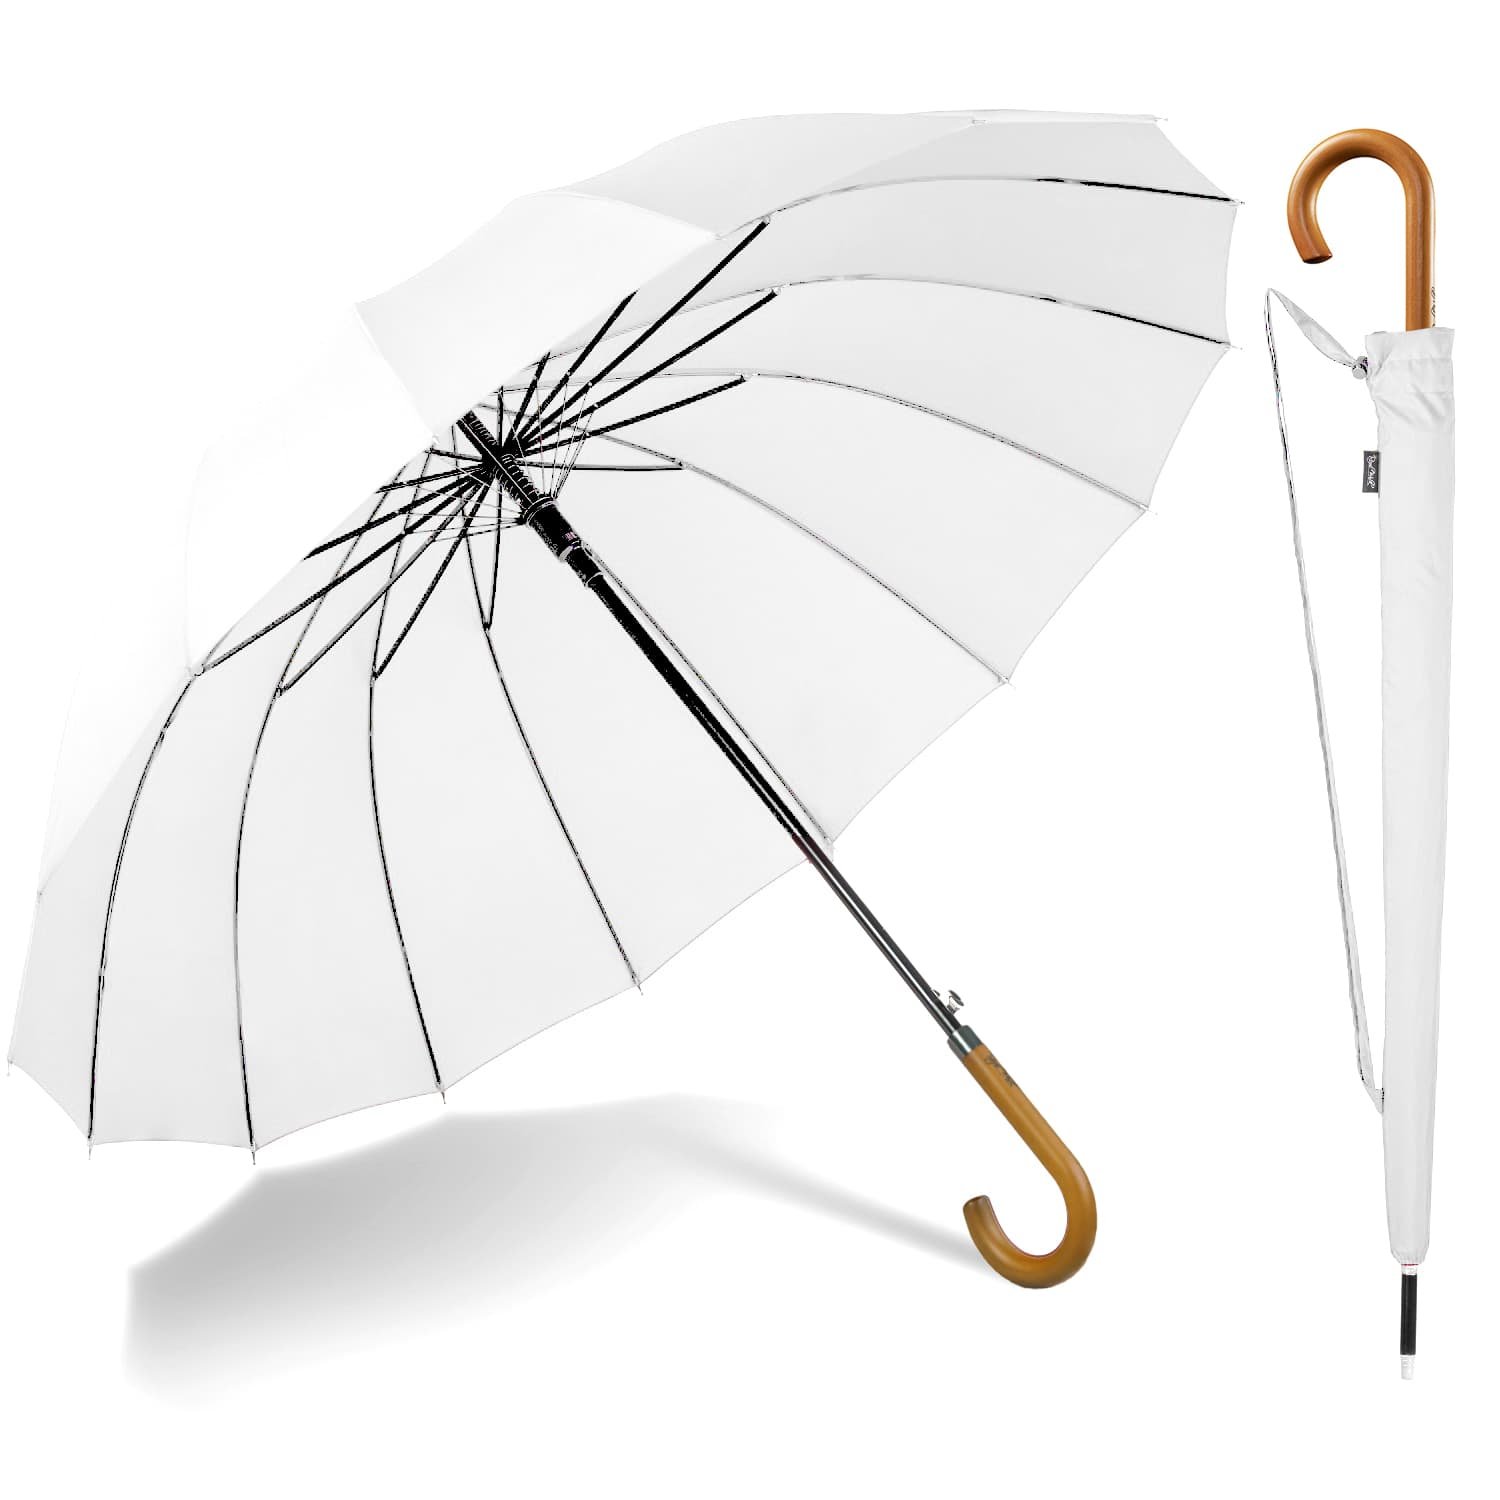 1500 large umbrella for rain windproof strong wood handle 16ribs 120cm 54in white 3